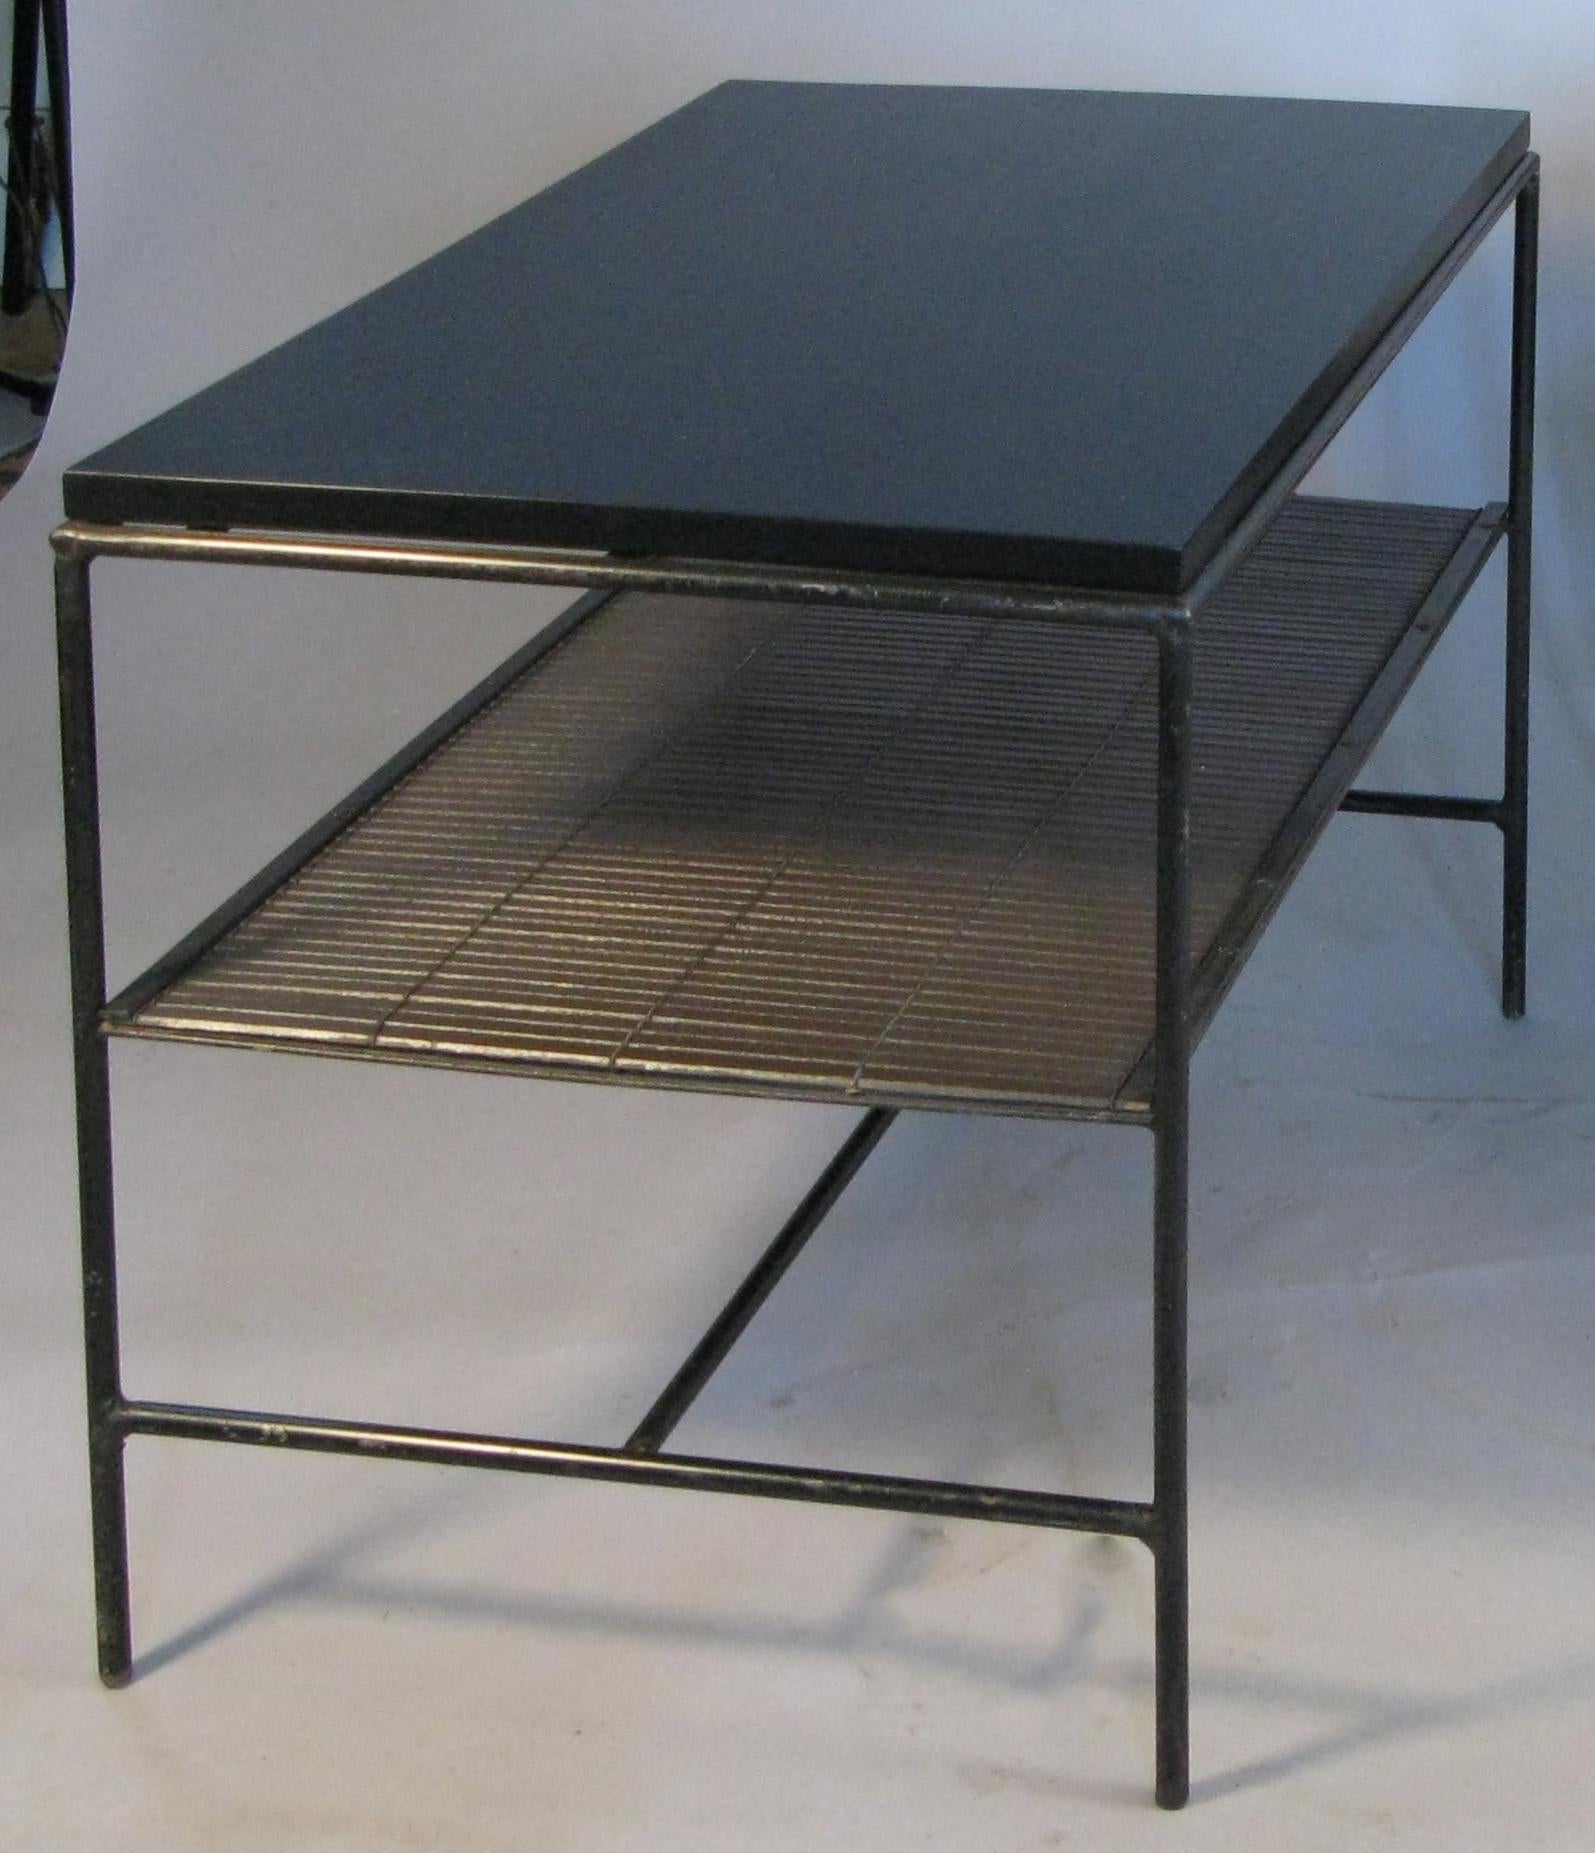 American Pair of Iron and Ebonized Maple Tables or Nightstands by Paul McCobb